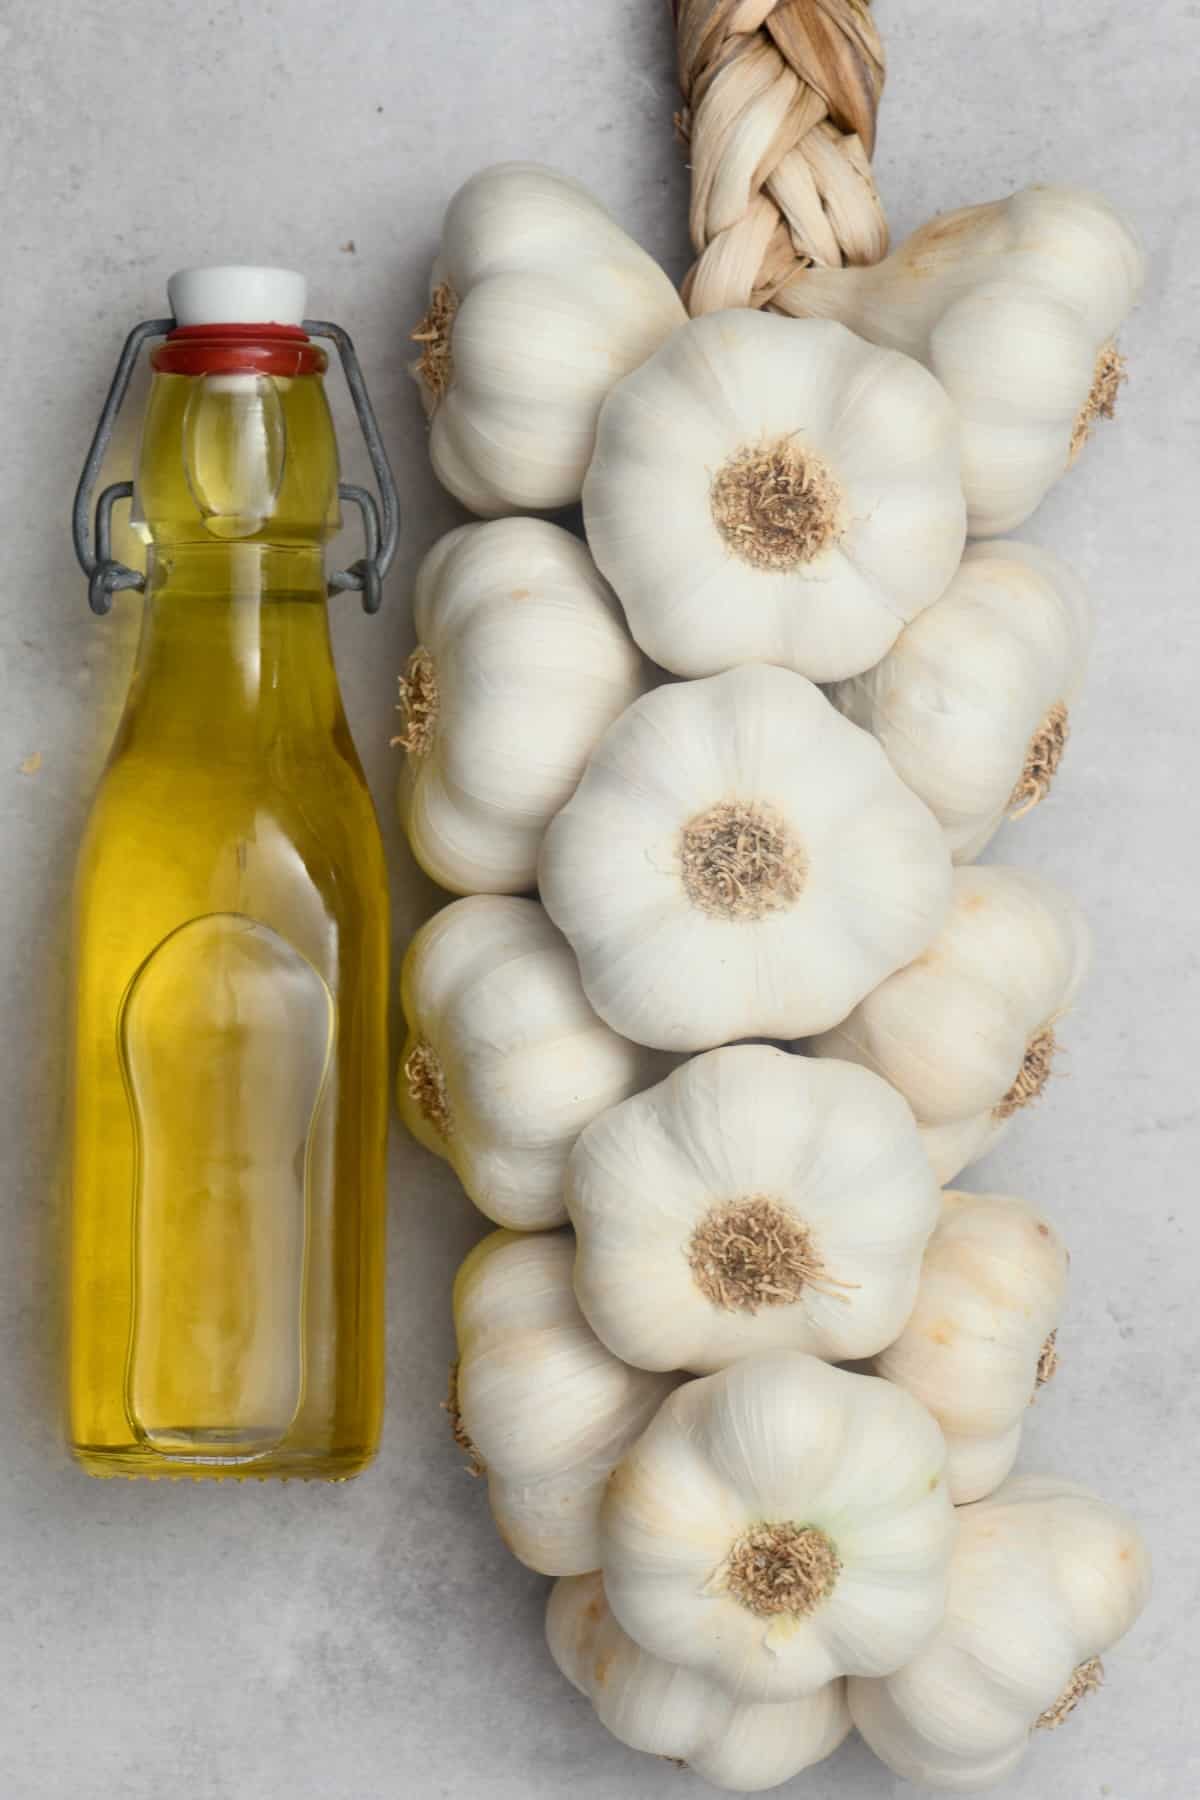 Garlic-infused oil in a bottle and garlic heads